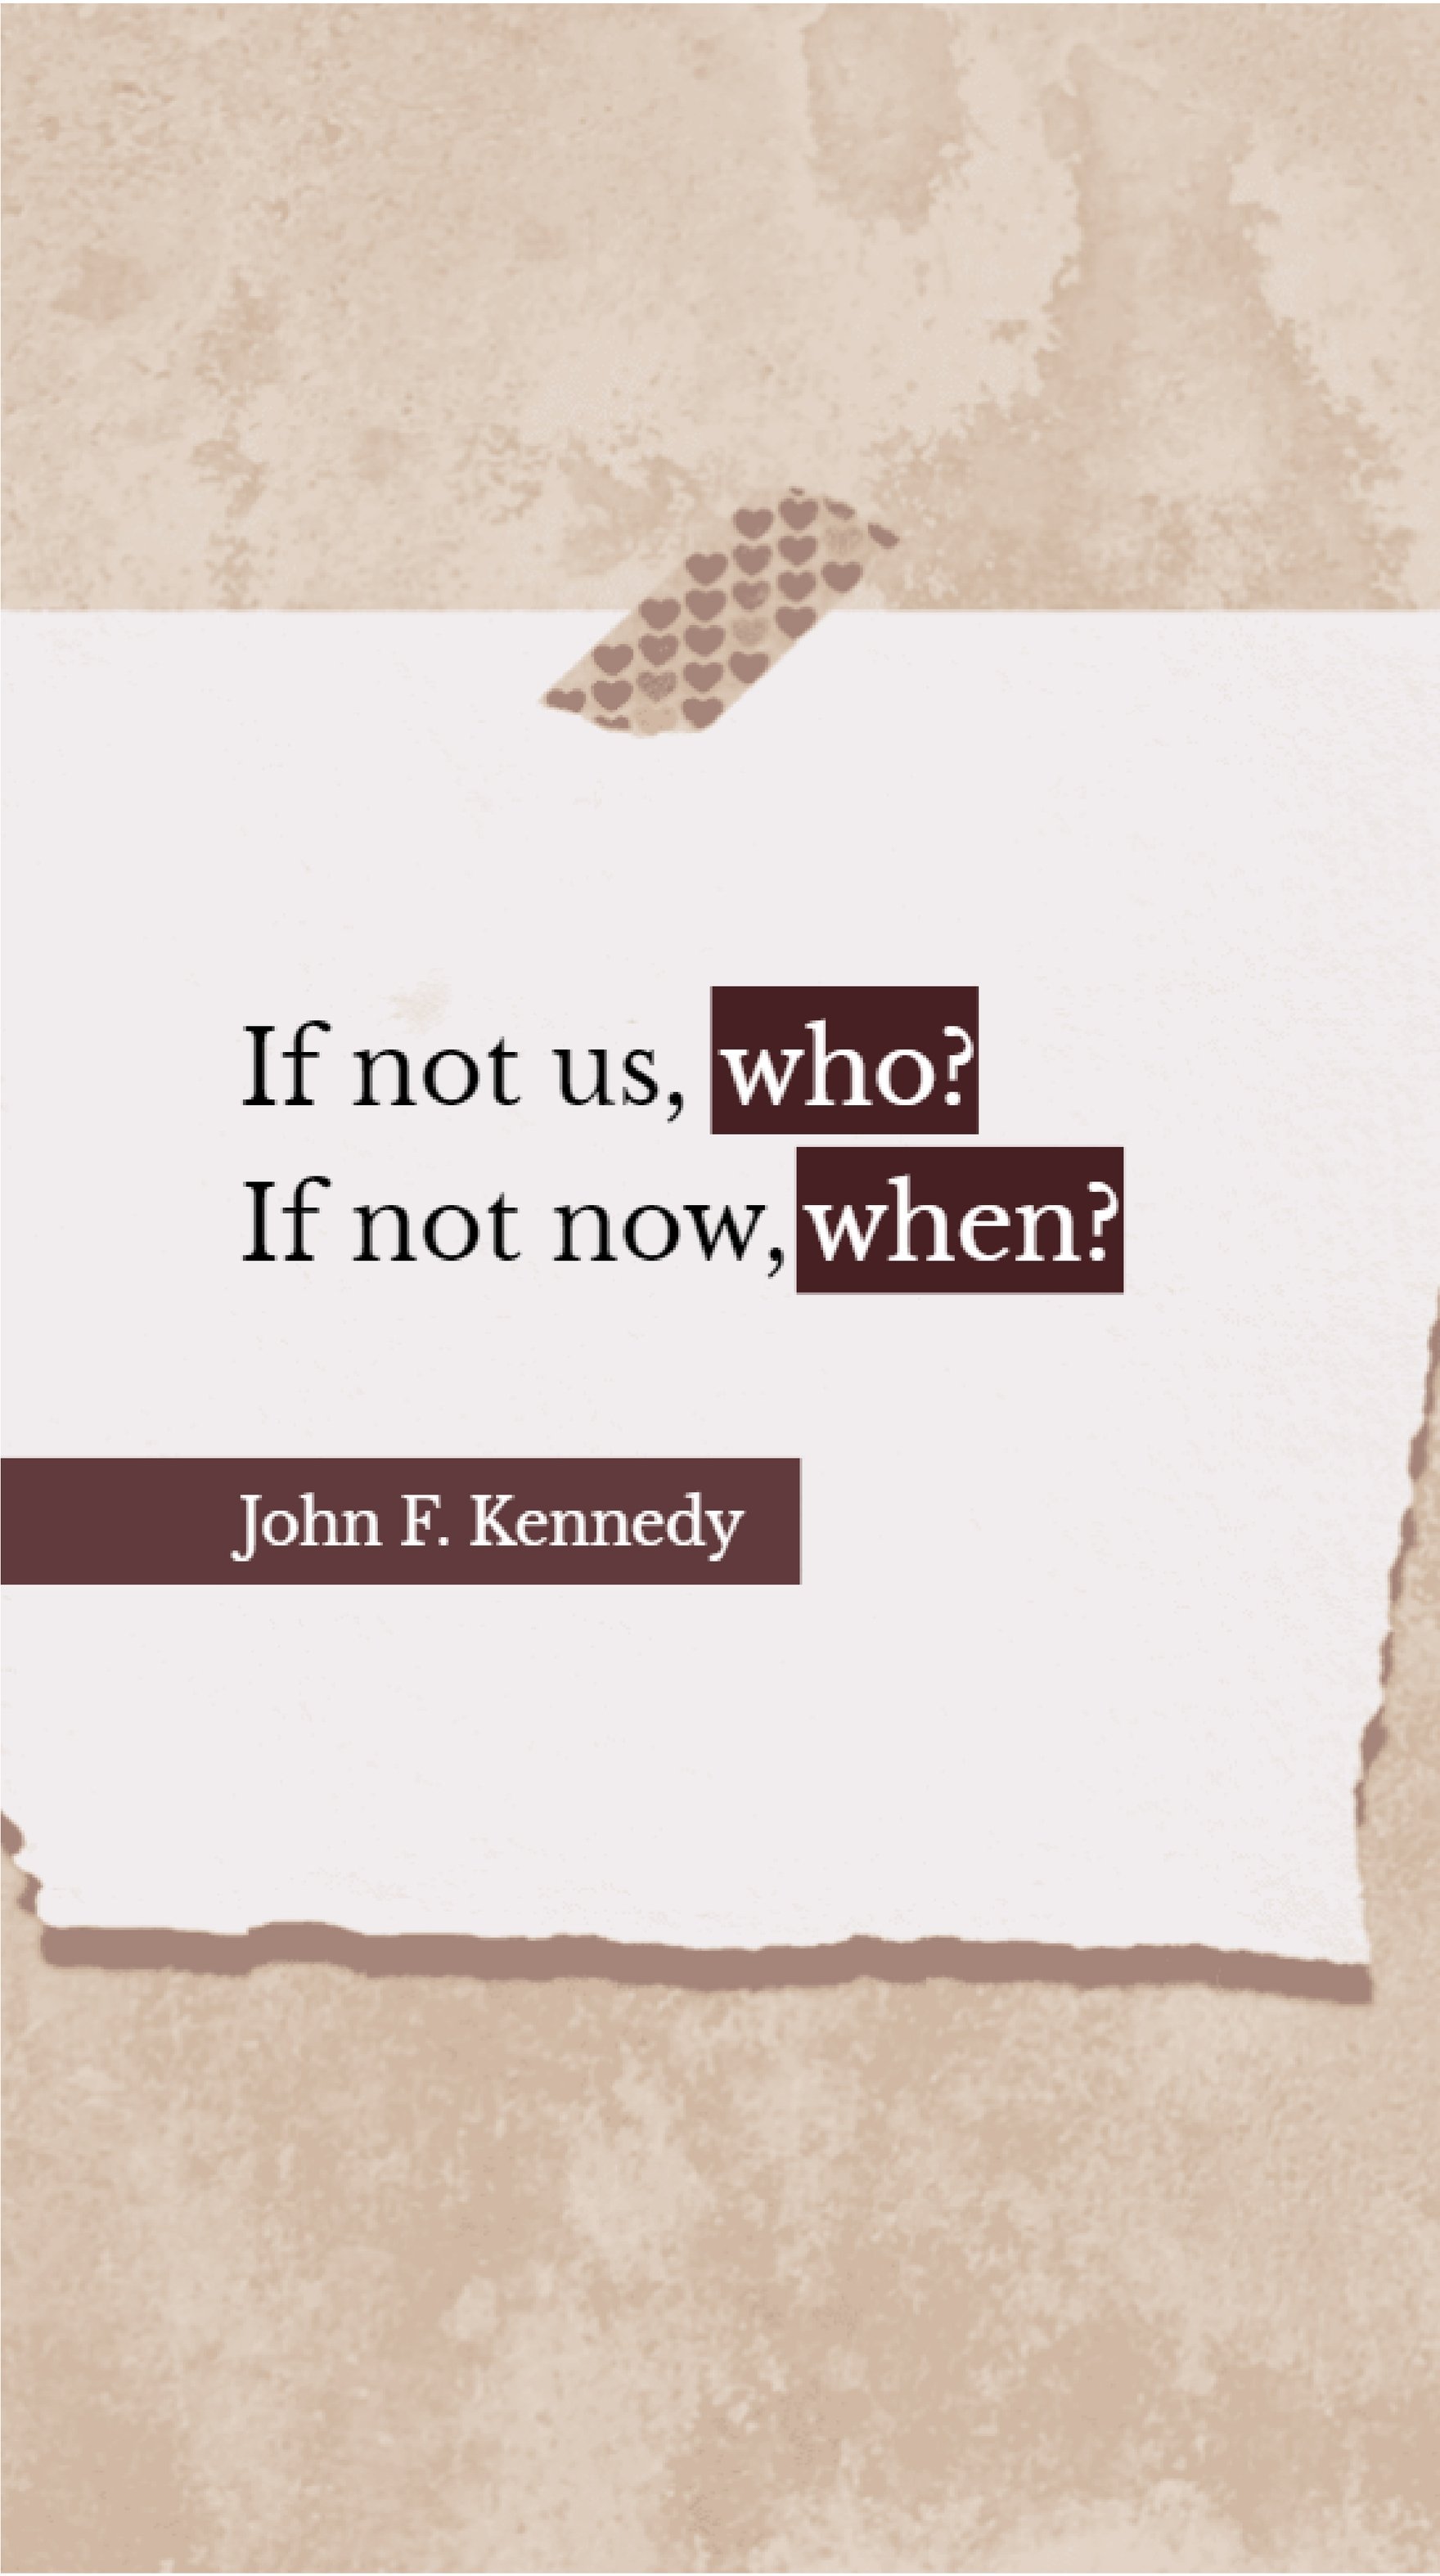 John F. Kennedy - If not us, who? If not now, when?